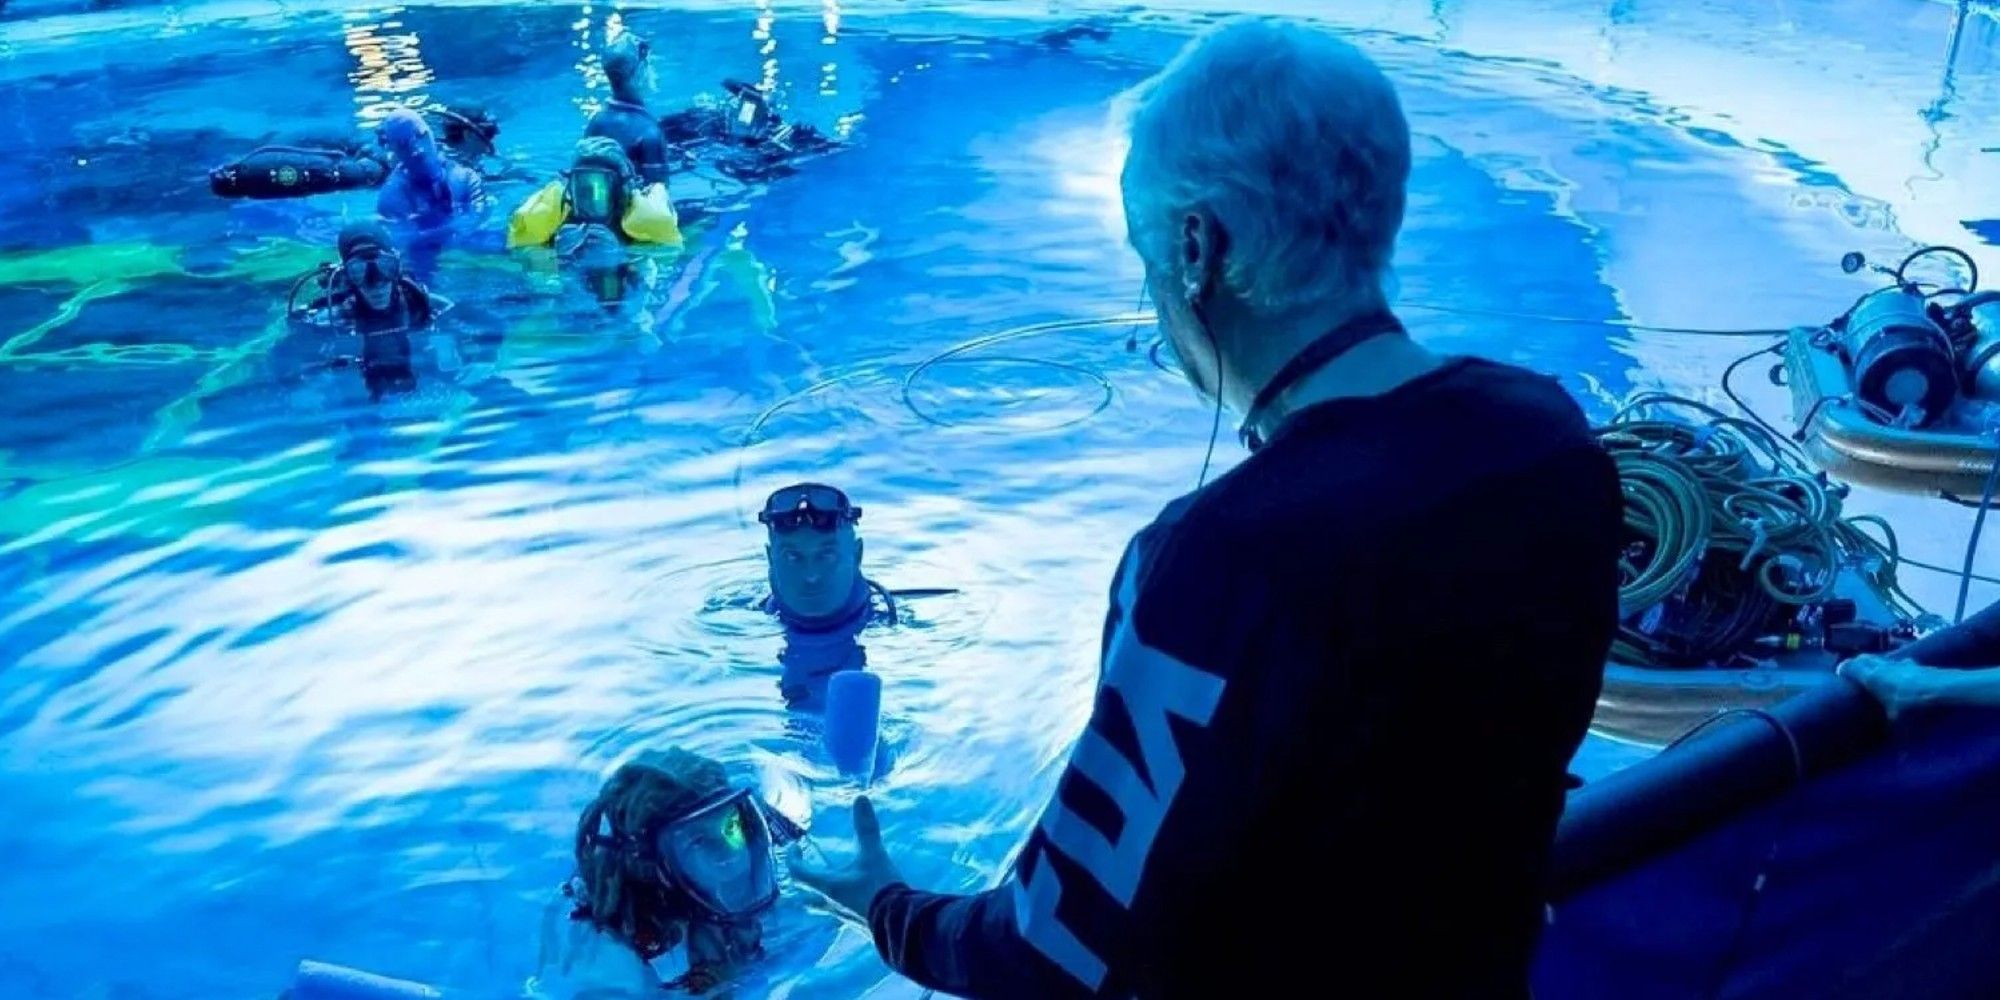 Avatar 2 The Way of Water Underwater Sequence Behind the Scenes